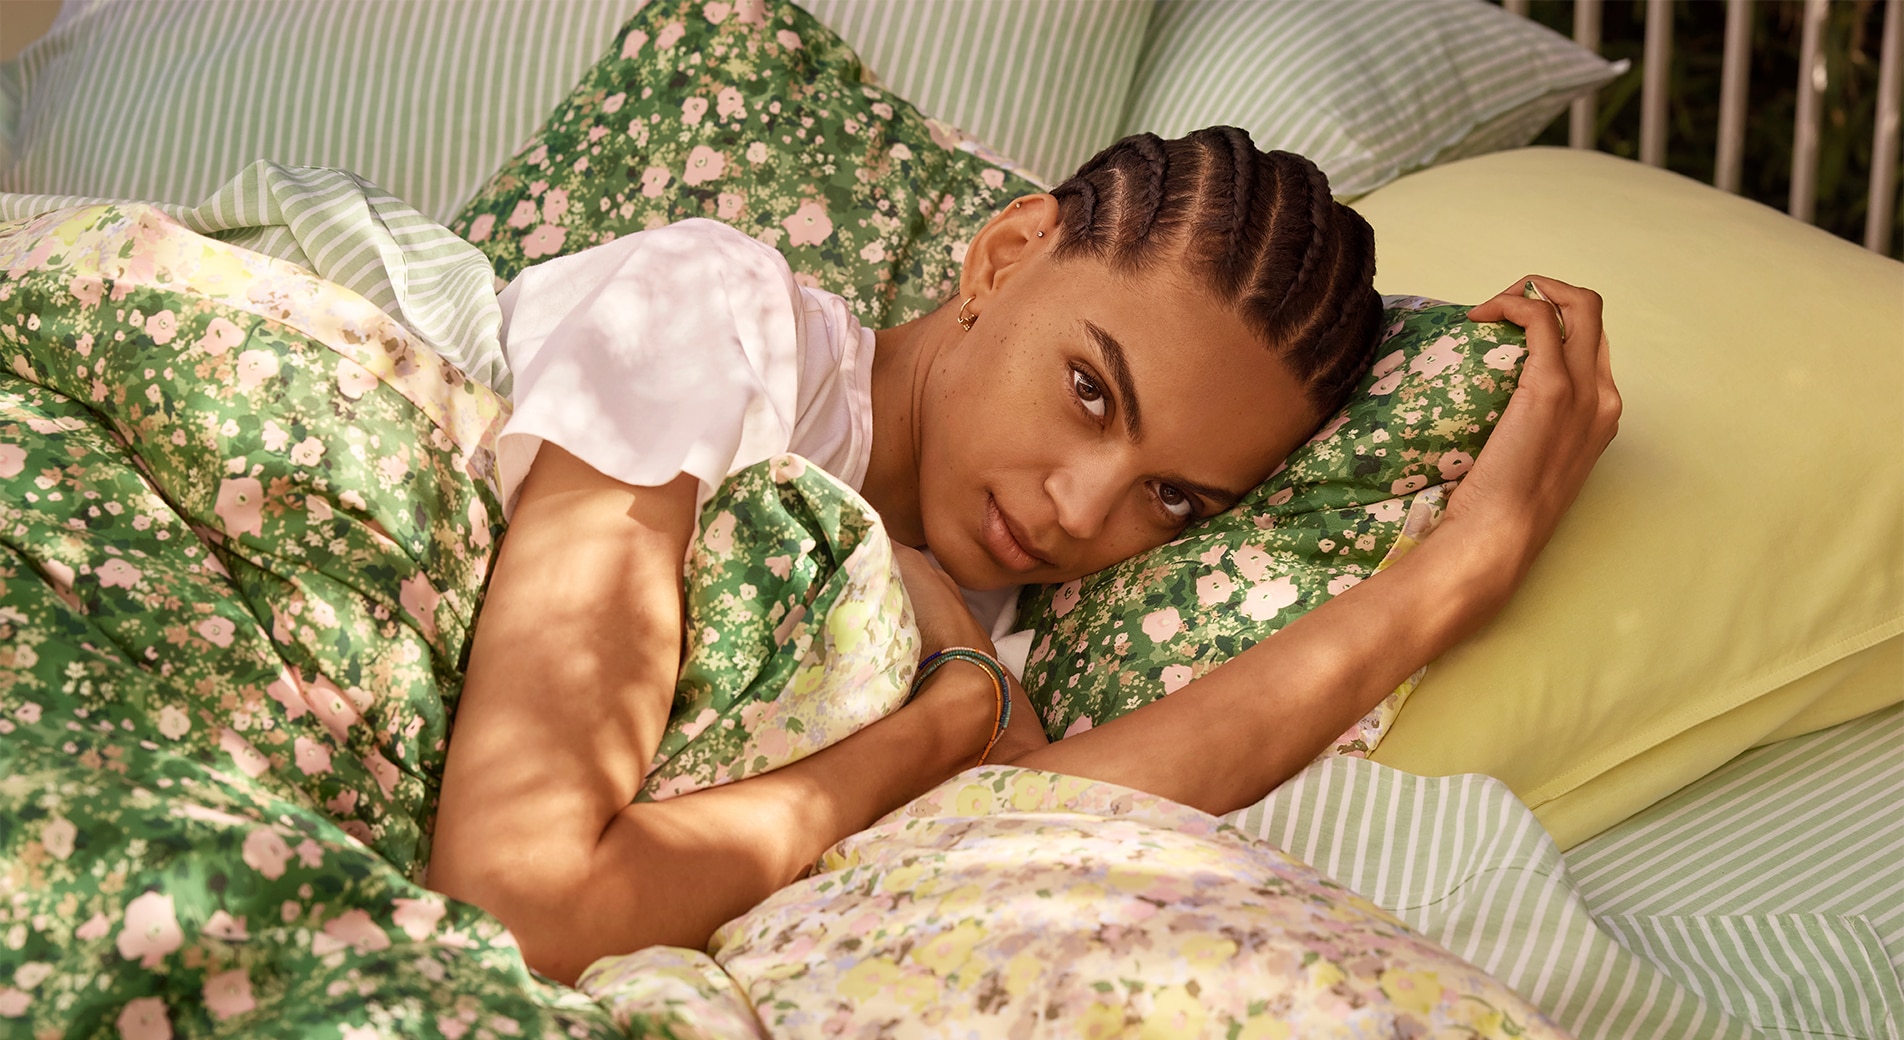 A young person laying in a plush green bed with floral and stripe bedding